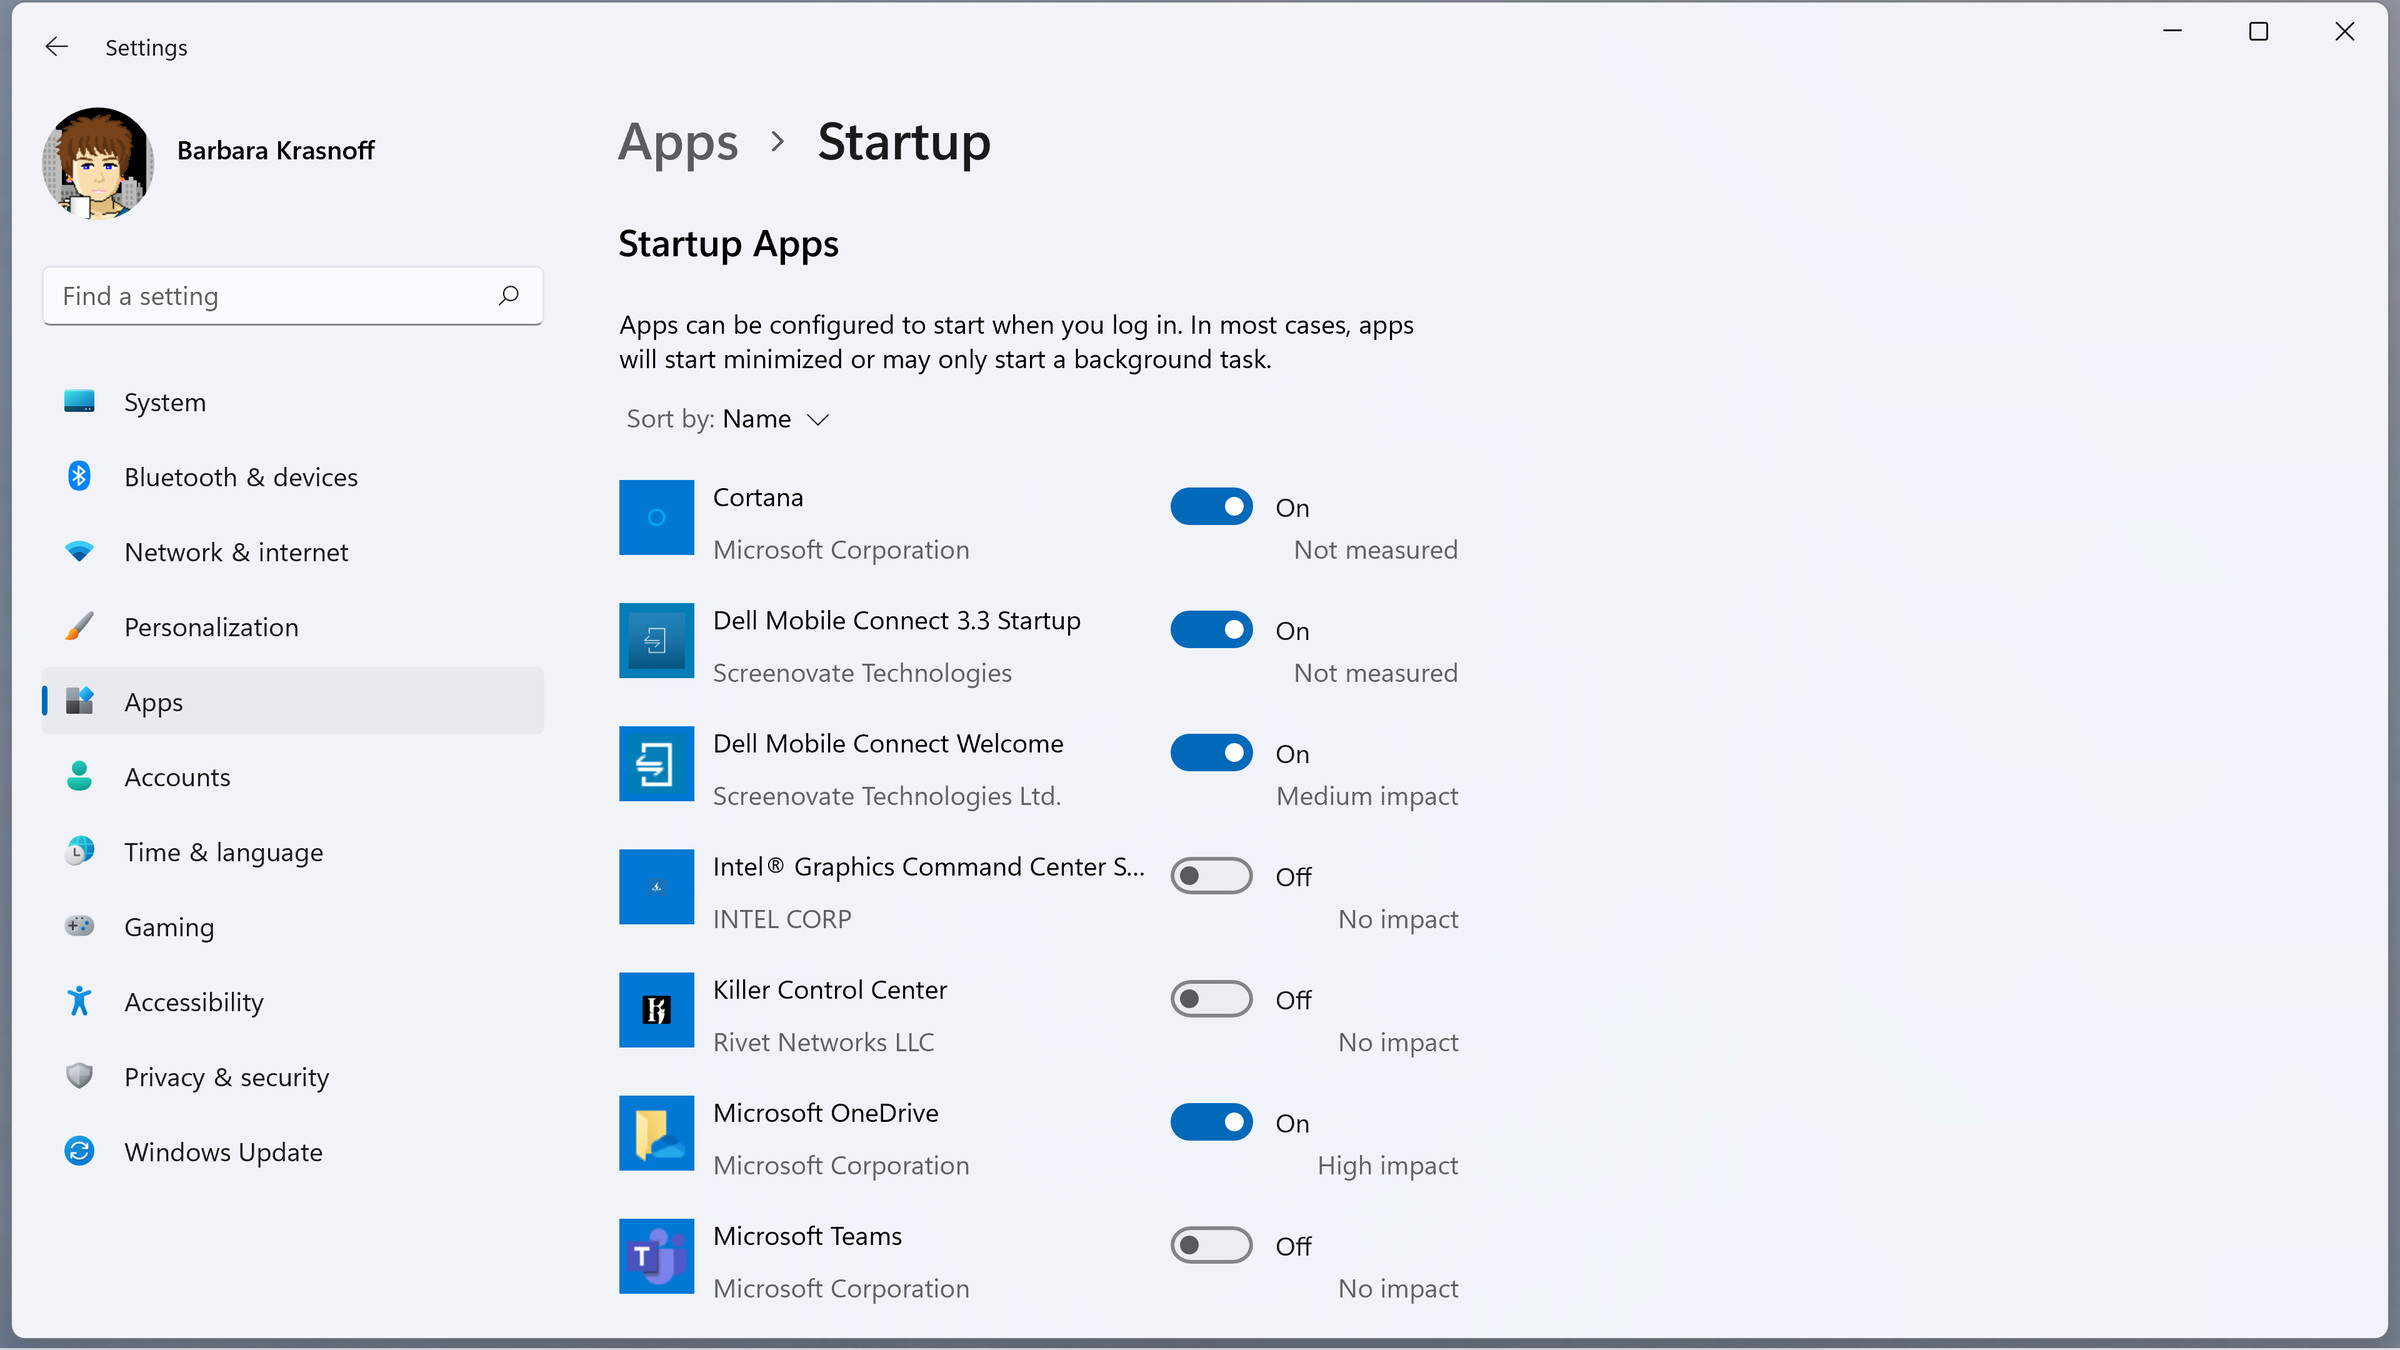 Toggle Teams off so it won’t automatically startup.